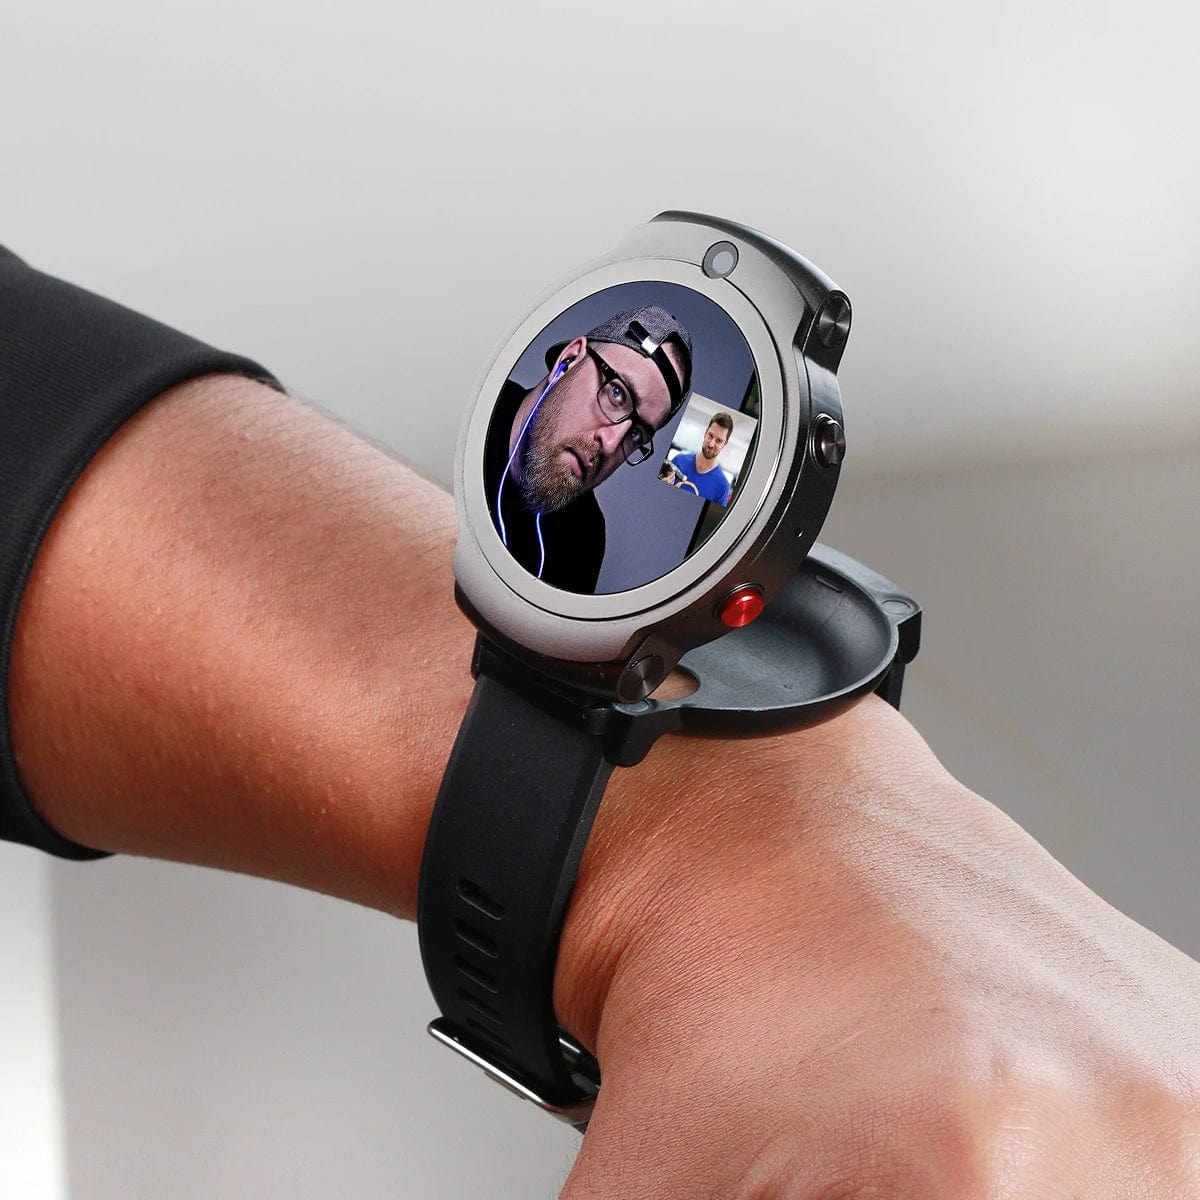 Fashion Meets Function: The DM28 Health Wrist Bracelet - 4G Android Smartwatch with WiFi, GPS, and More